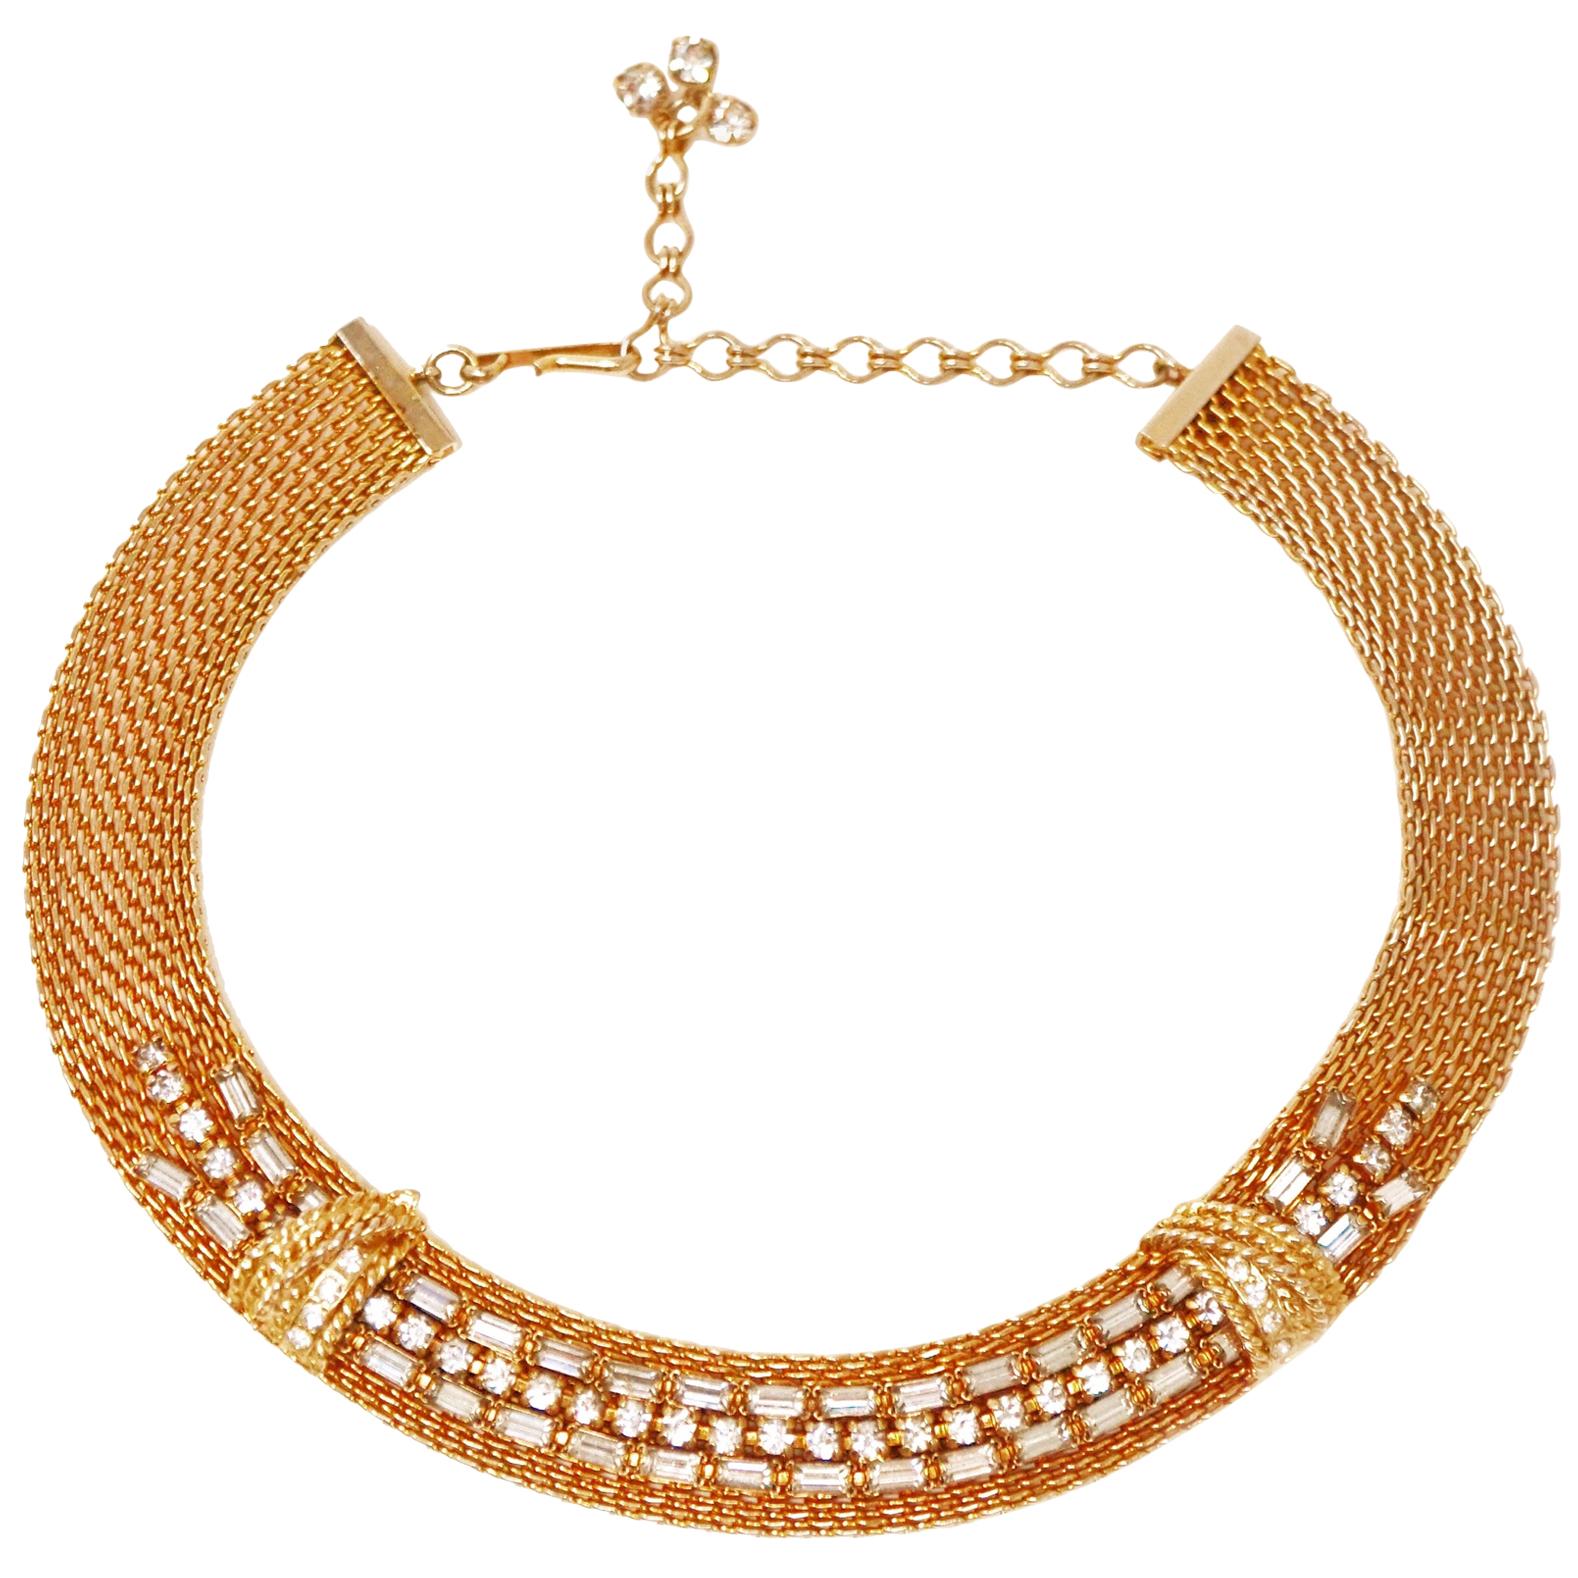 Baguette Rhinestone Mesh Choker Necklace by Jewels By Julio, circa 1950, Signed